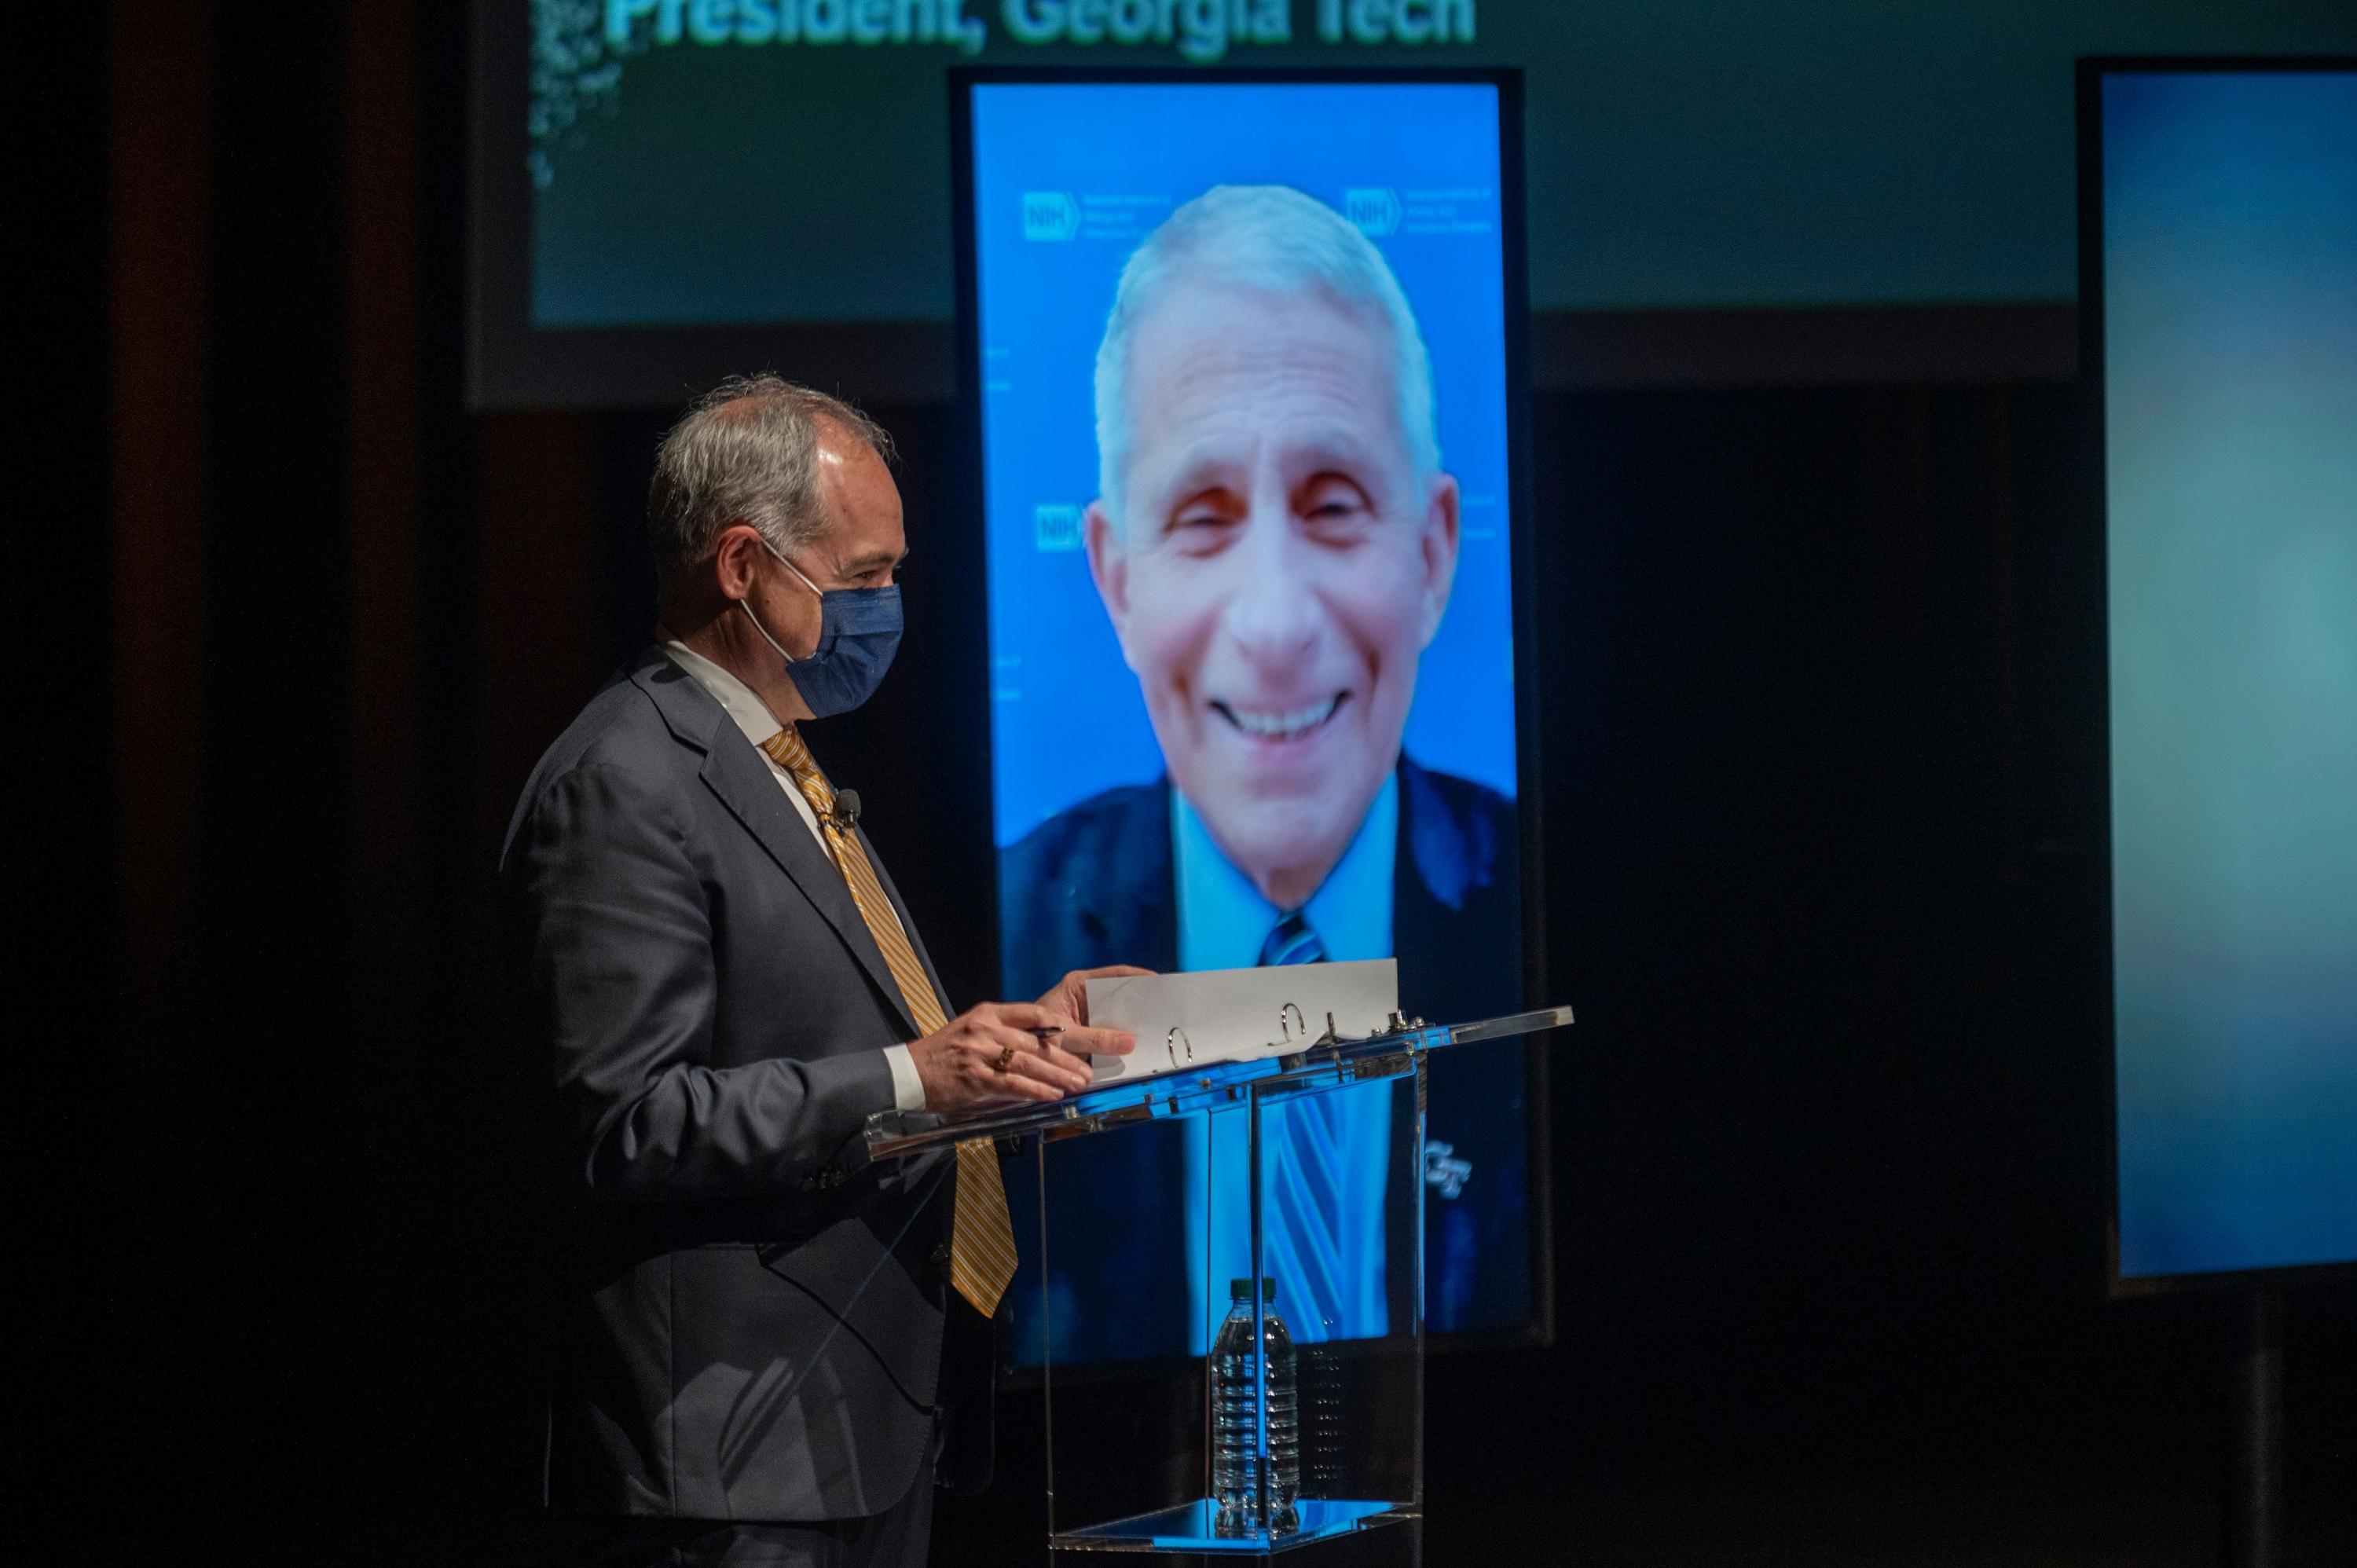 “I’m deeply honored to accept this award, with gratitude and profound humility,” said Fauci.